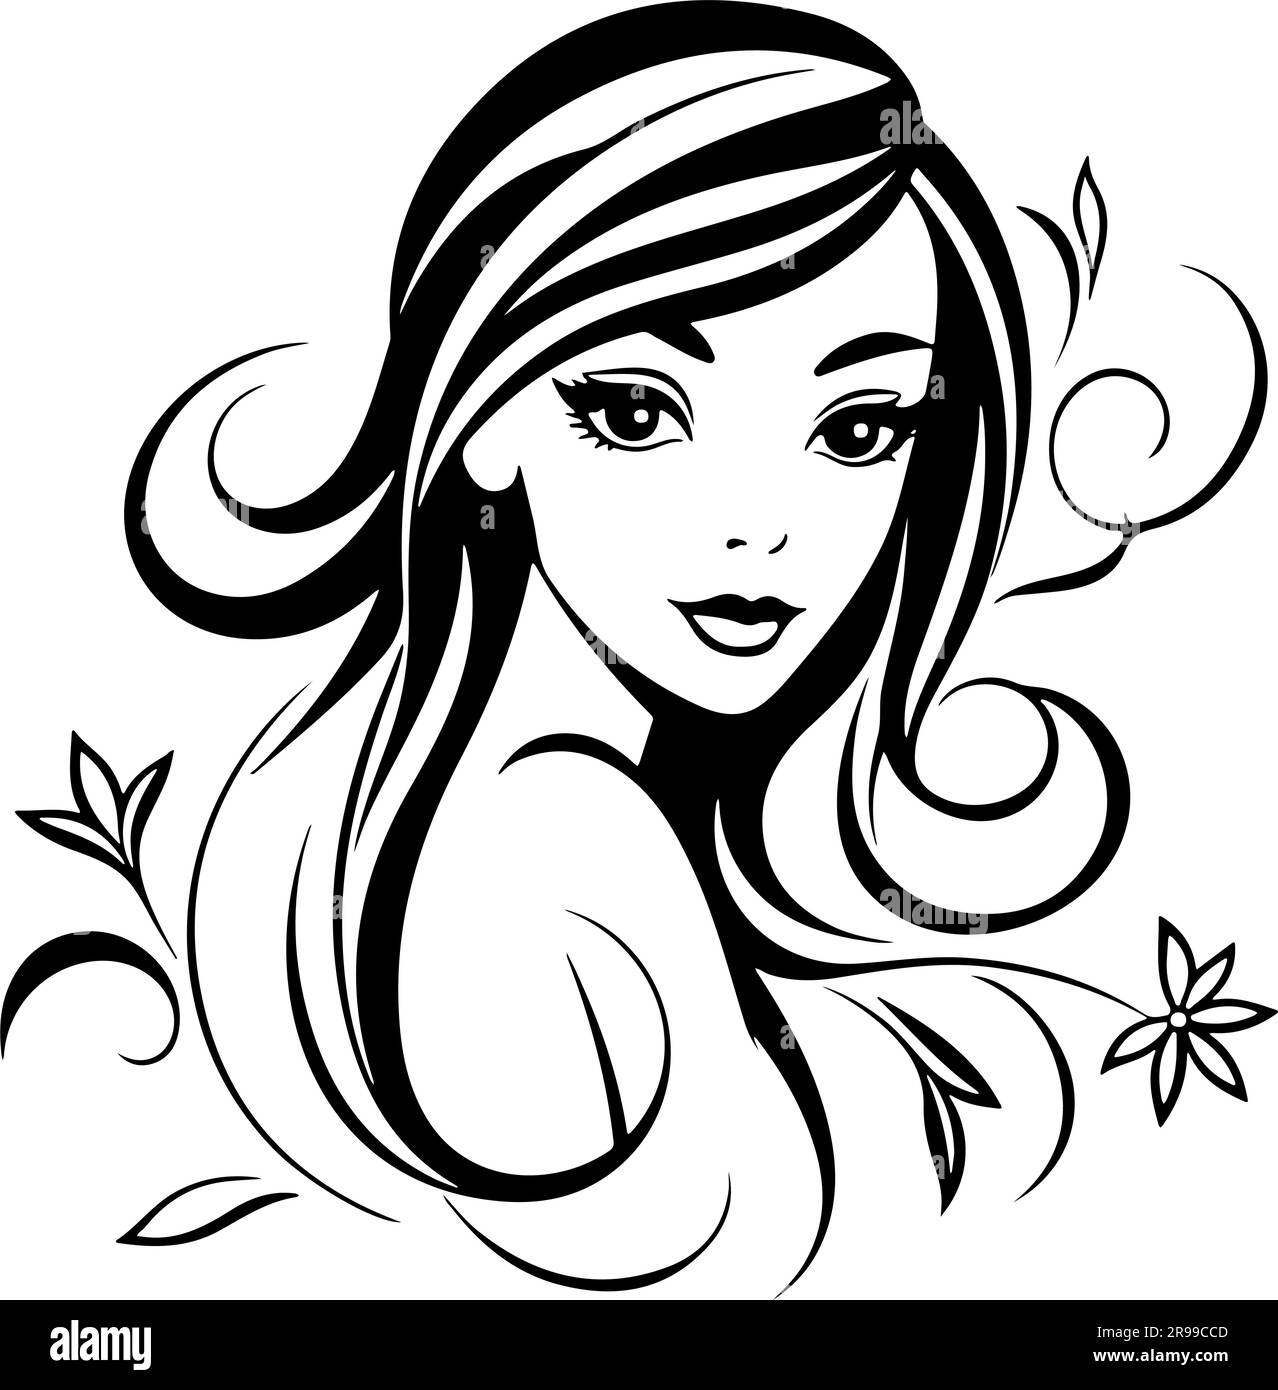 Vector illustration, a joyful young woman radiating happiness and vibrant energy. Stock Vector